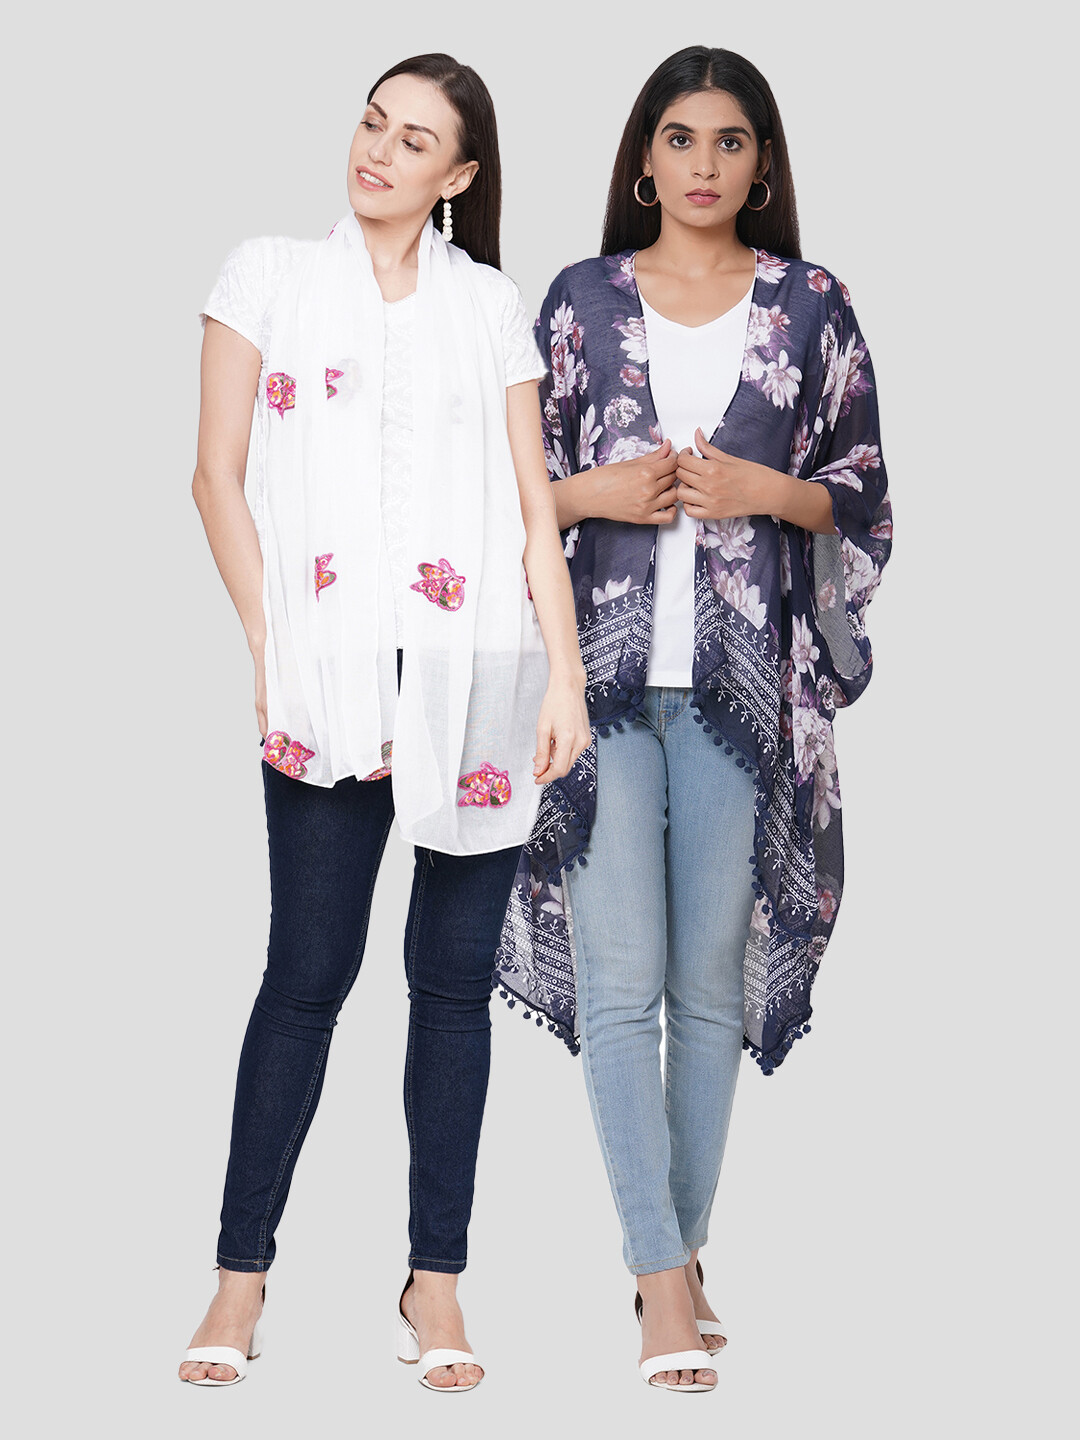 Stylist Printed Ponchos & Embroidered Scarf - Combo offer